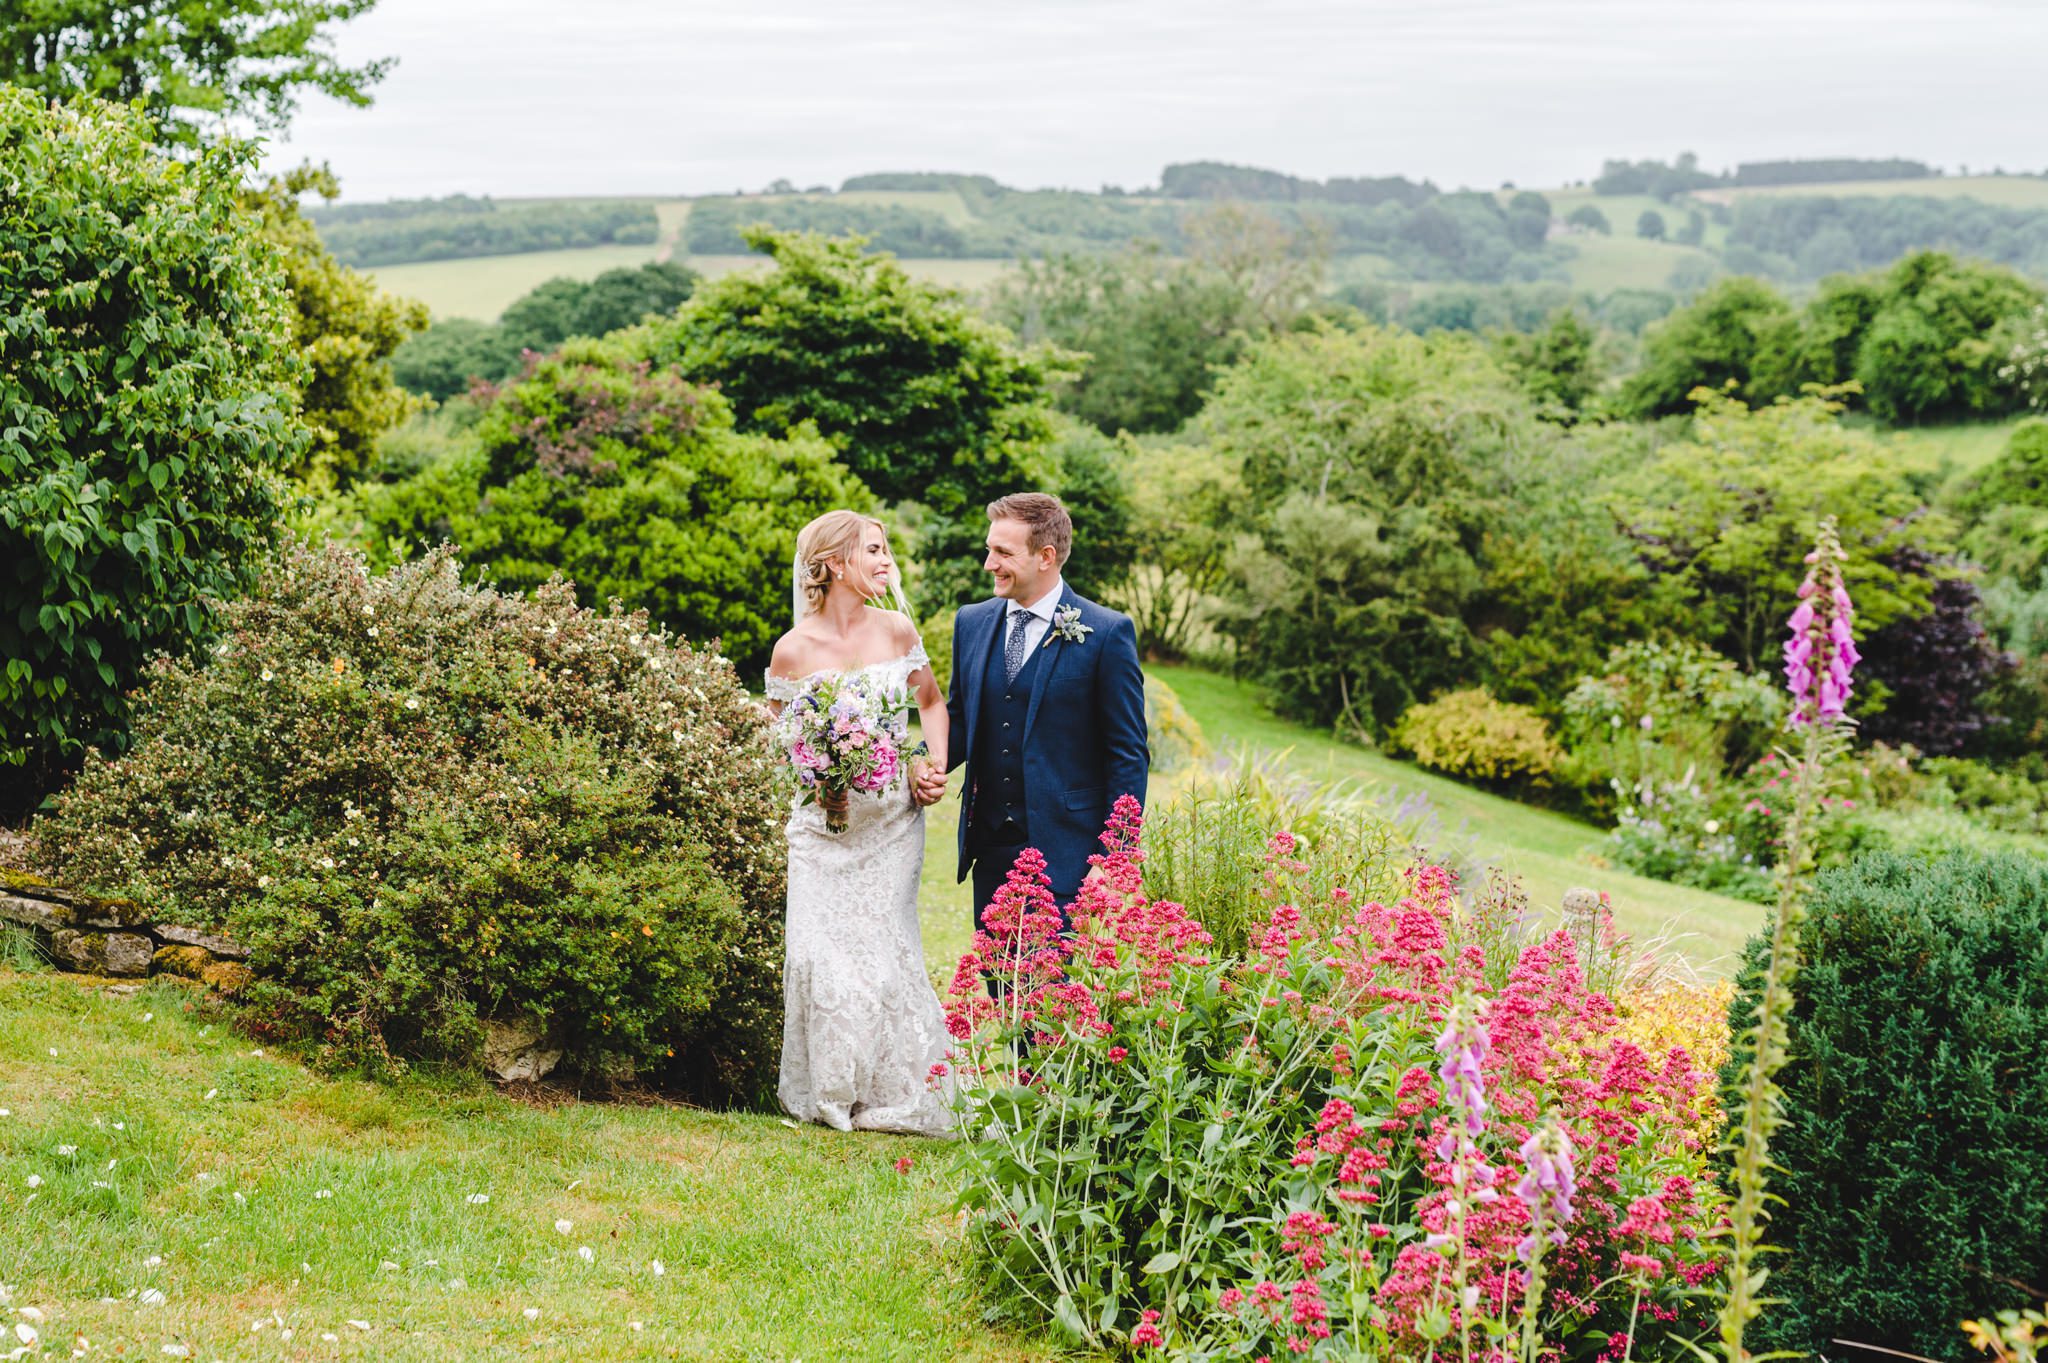 Perfect wedding pictures at Upcote Barn in The Cotswolds by Bigeye Photography